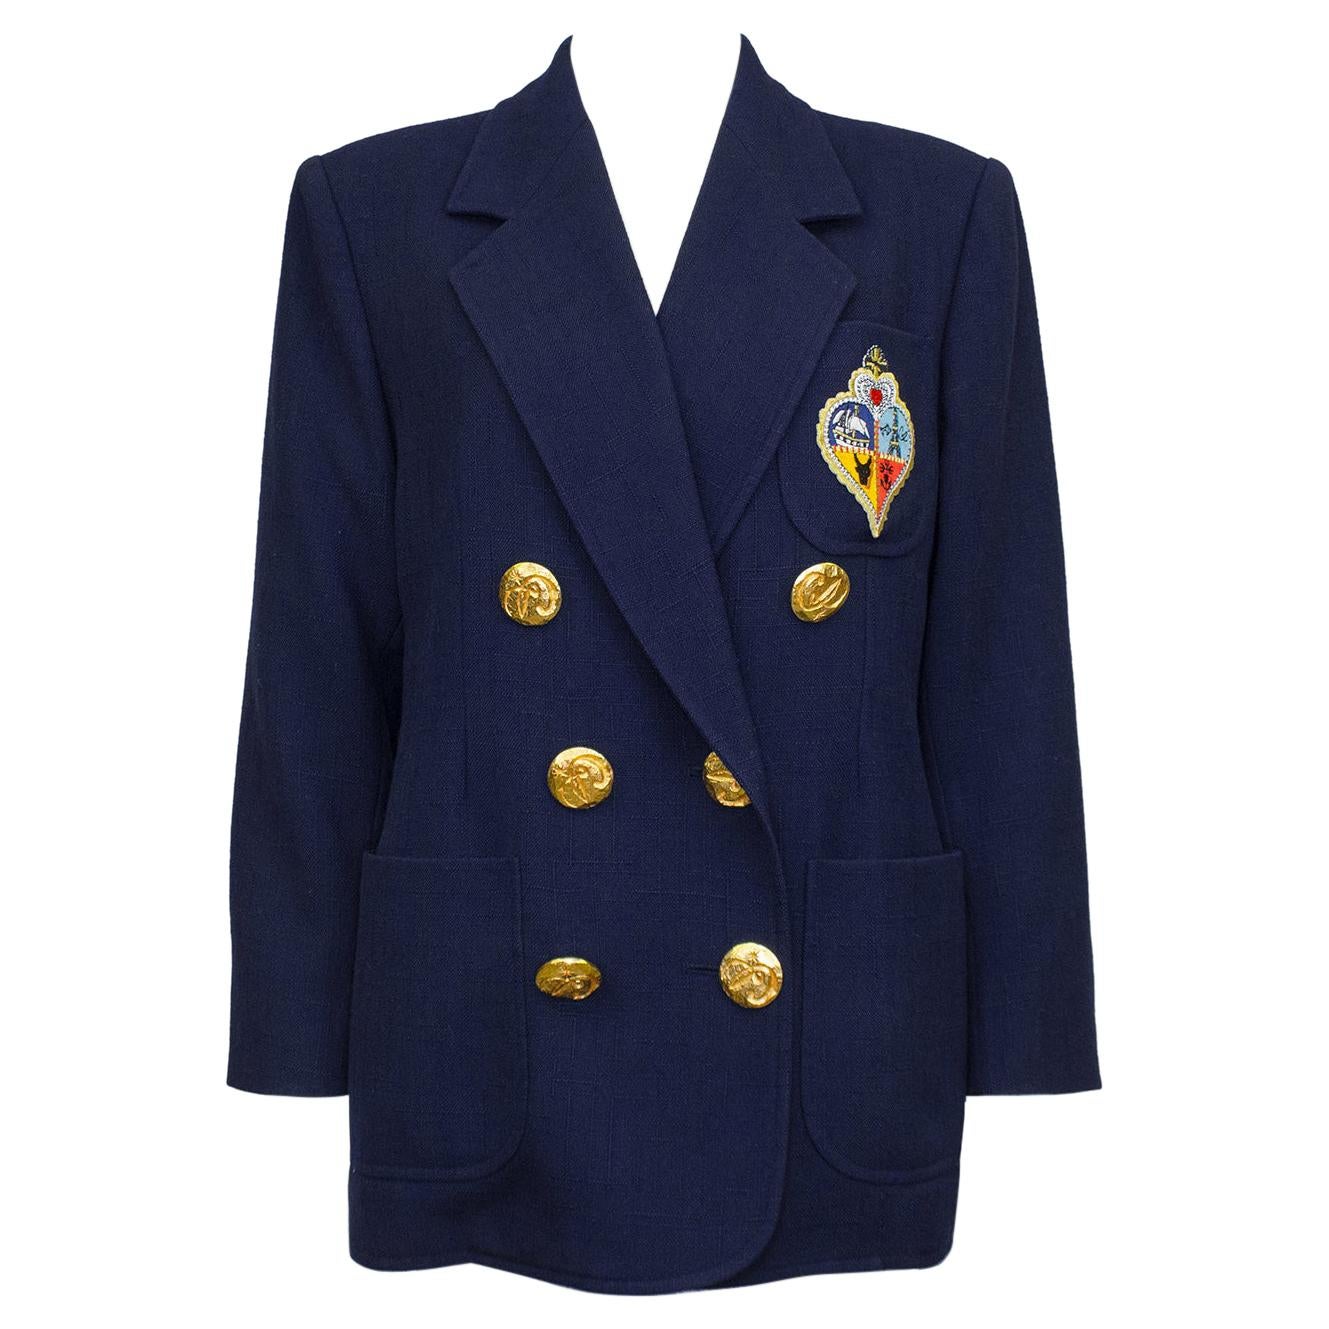 1990s Christian Lacroix Navy Blue Double Breasted Blazer with Crest